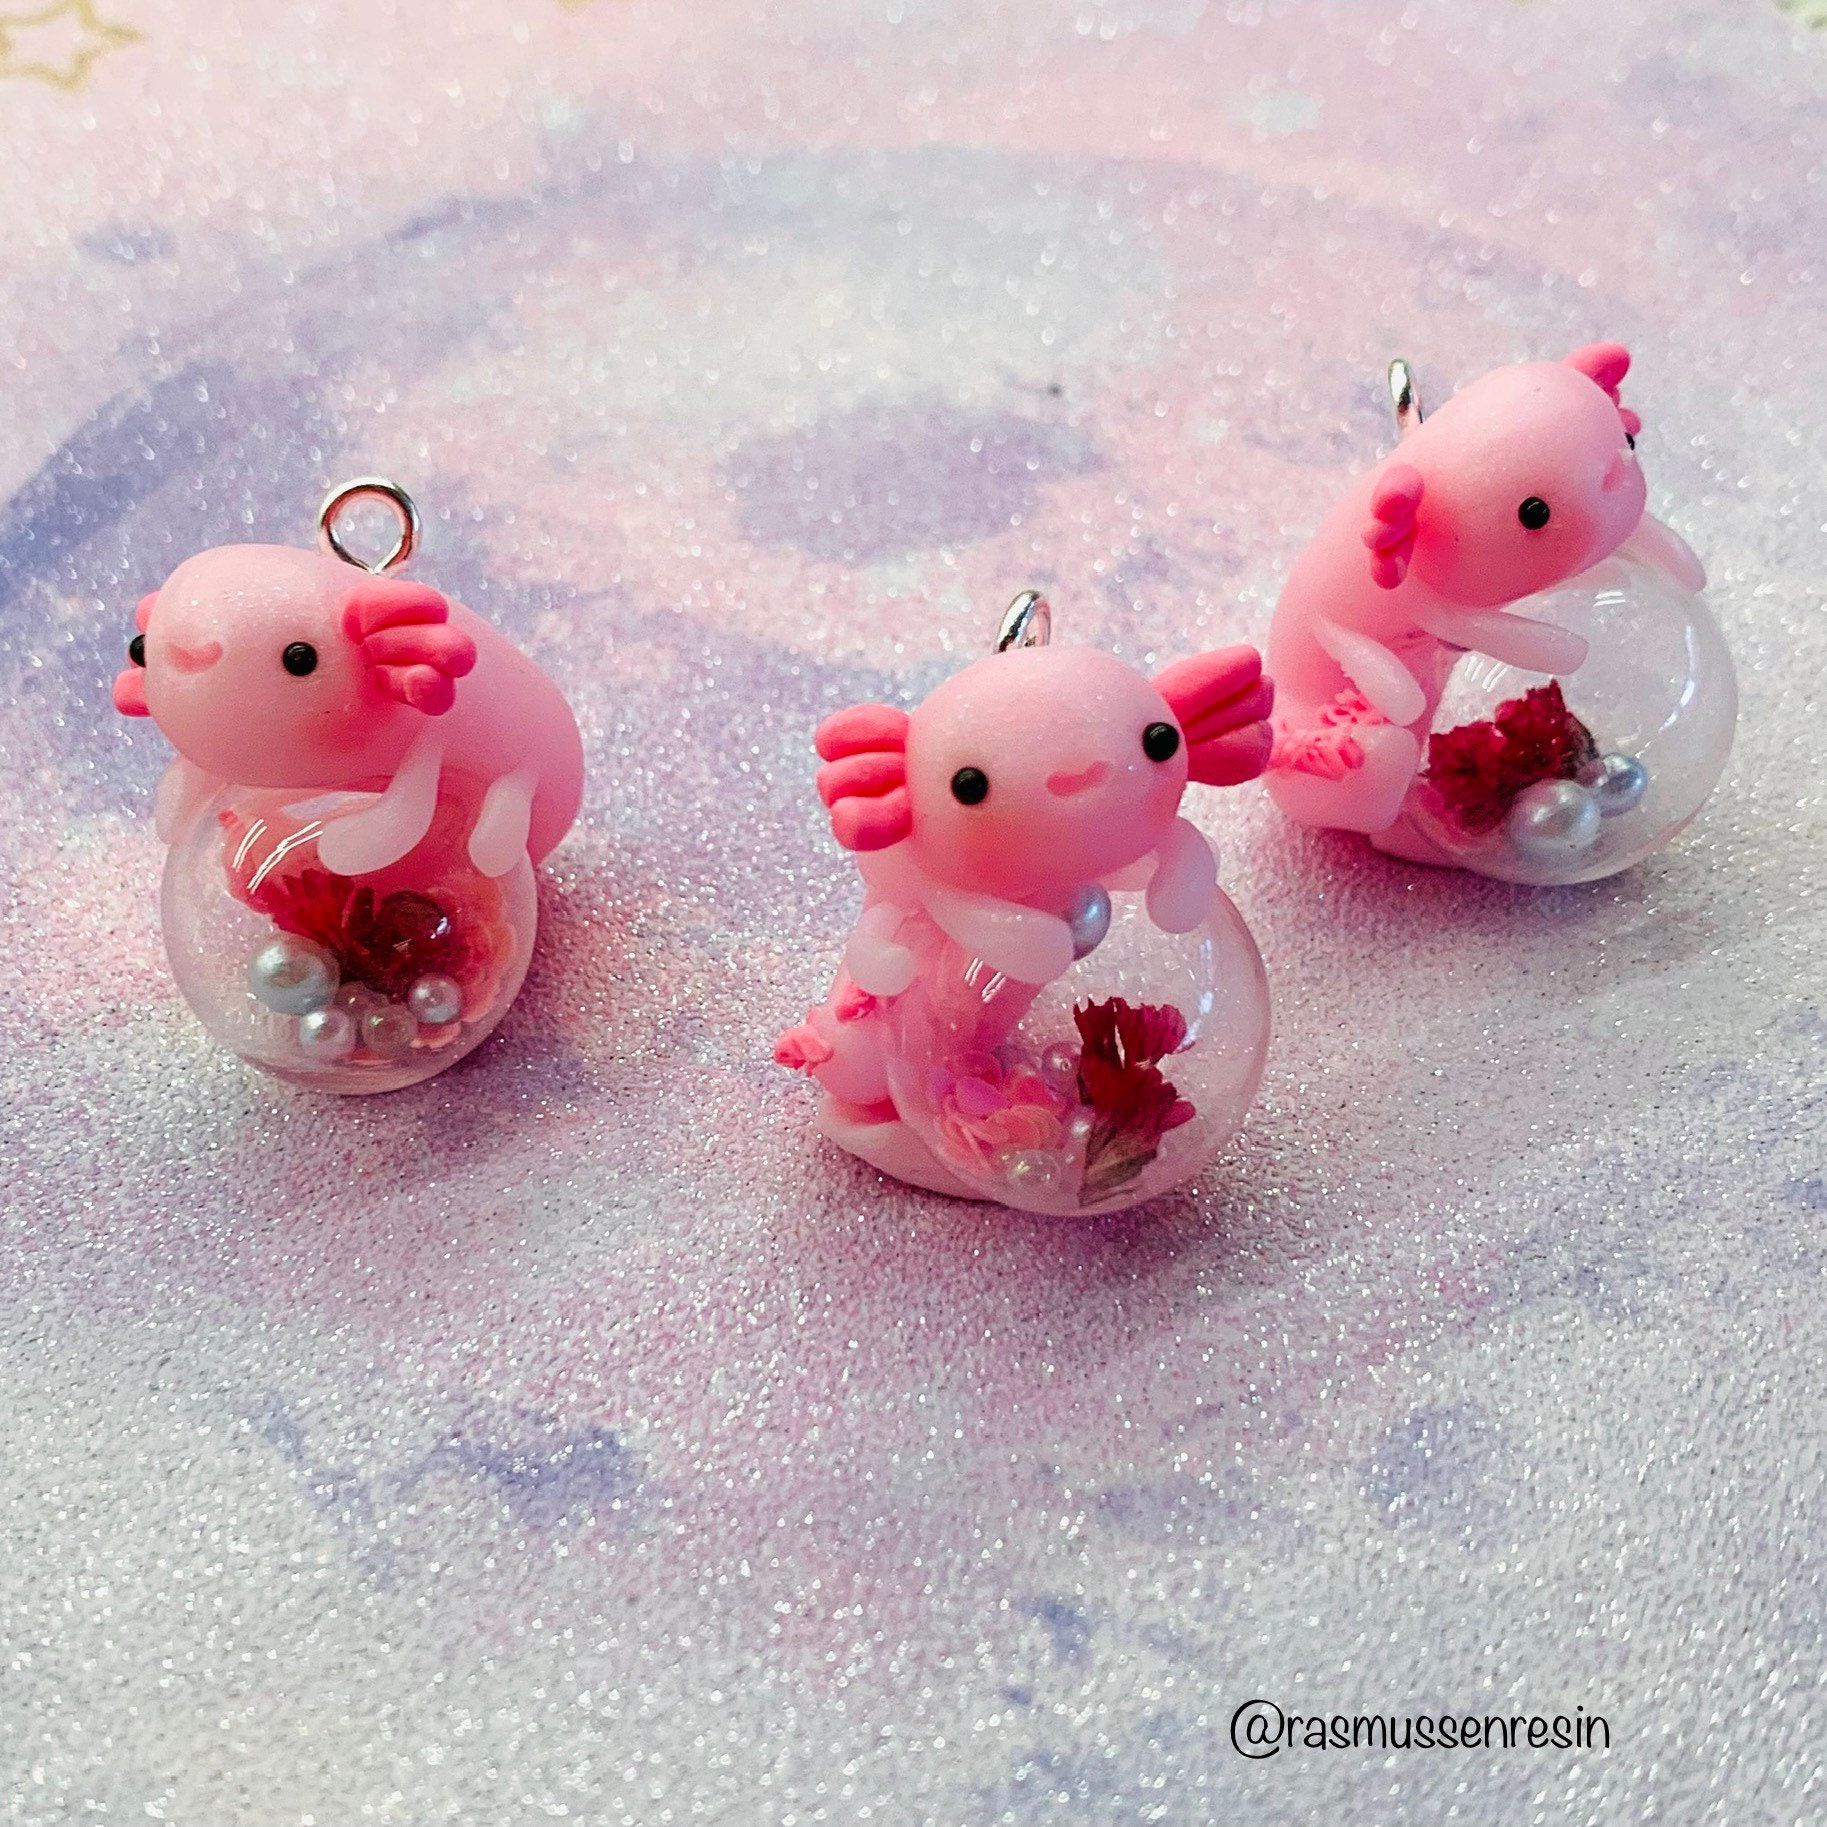 I made some axolotl charms - I used Fimo effects rose quartz and